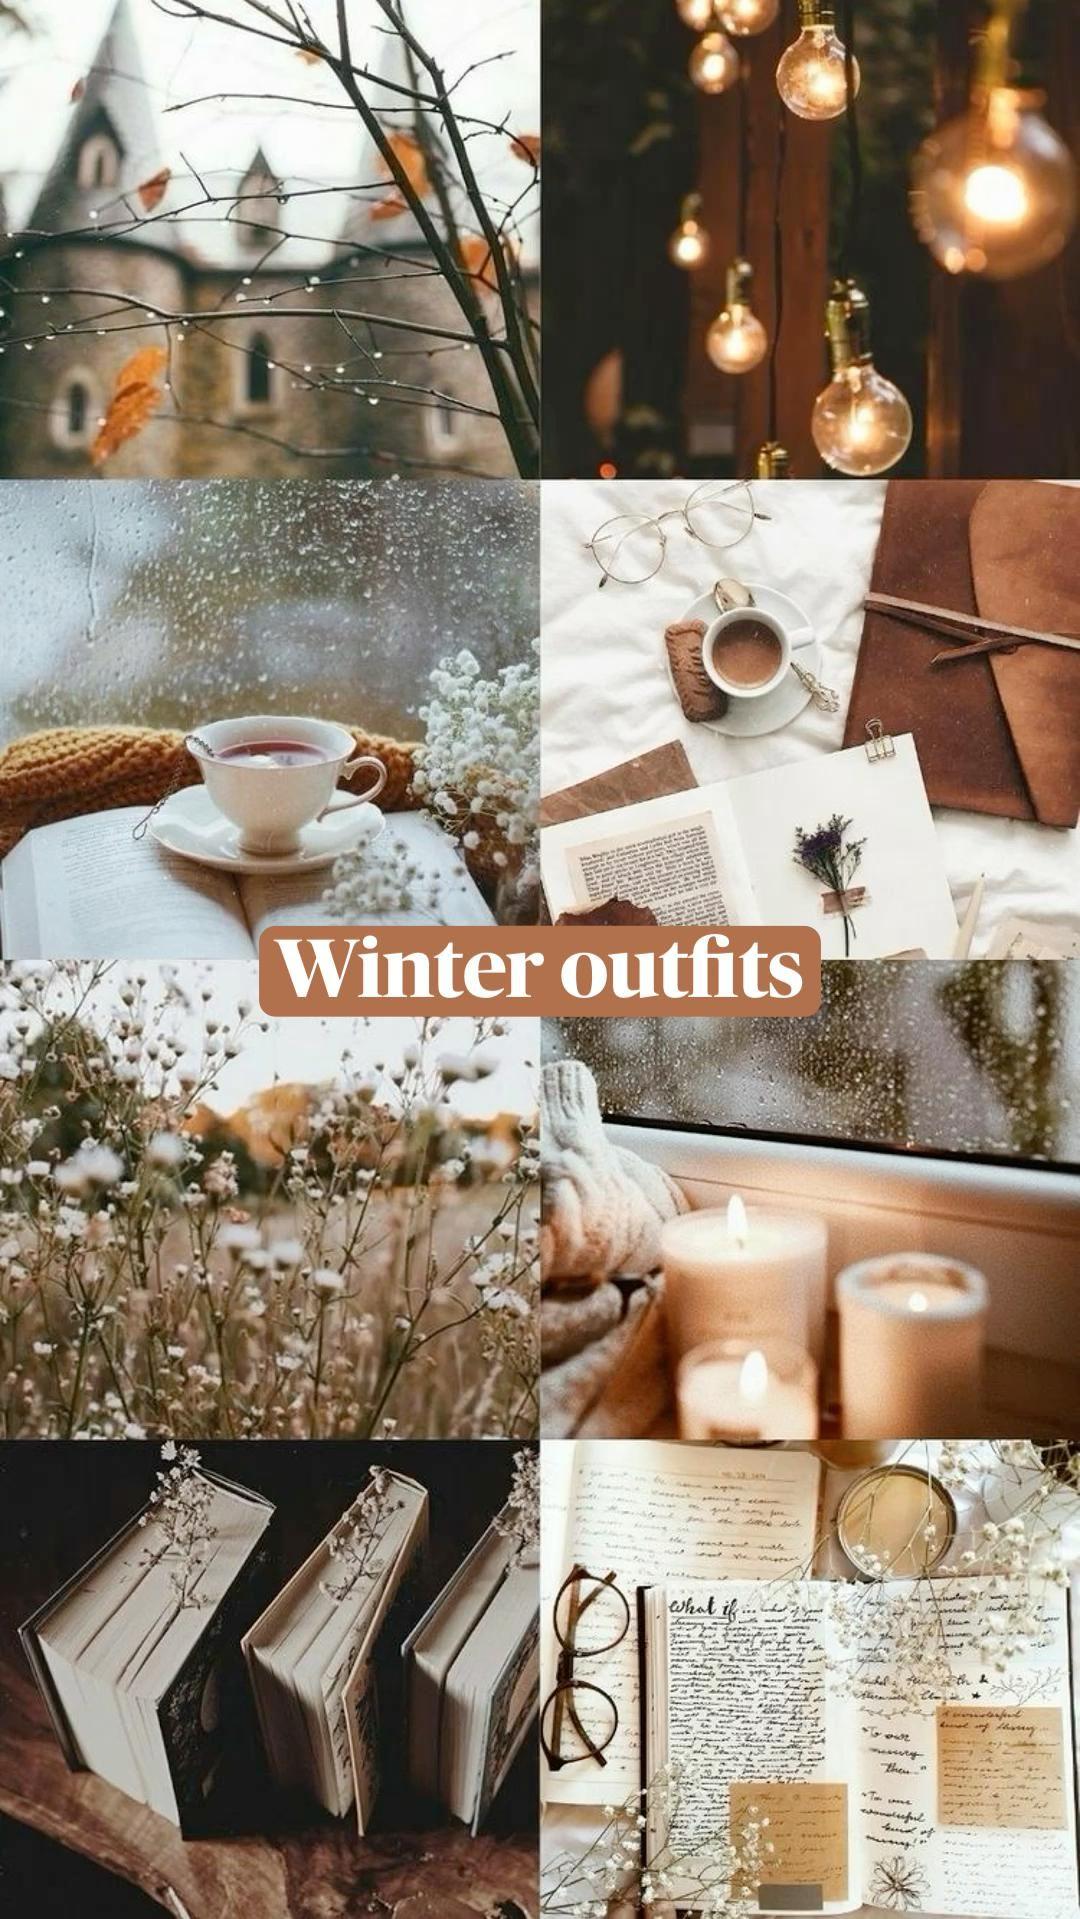 Winter Outfits Fall Wallpaper Autumn Cozy Inspiration